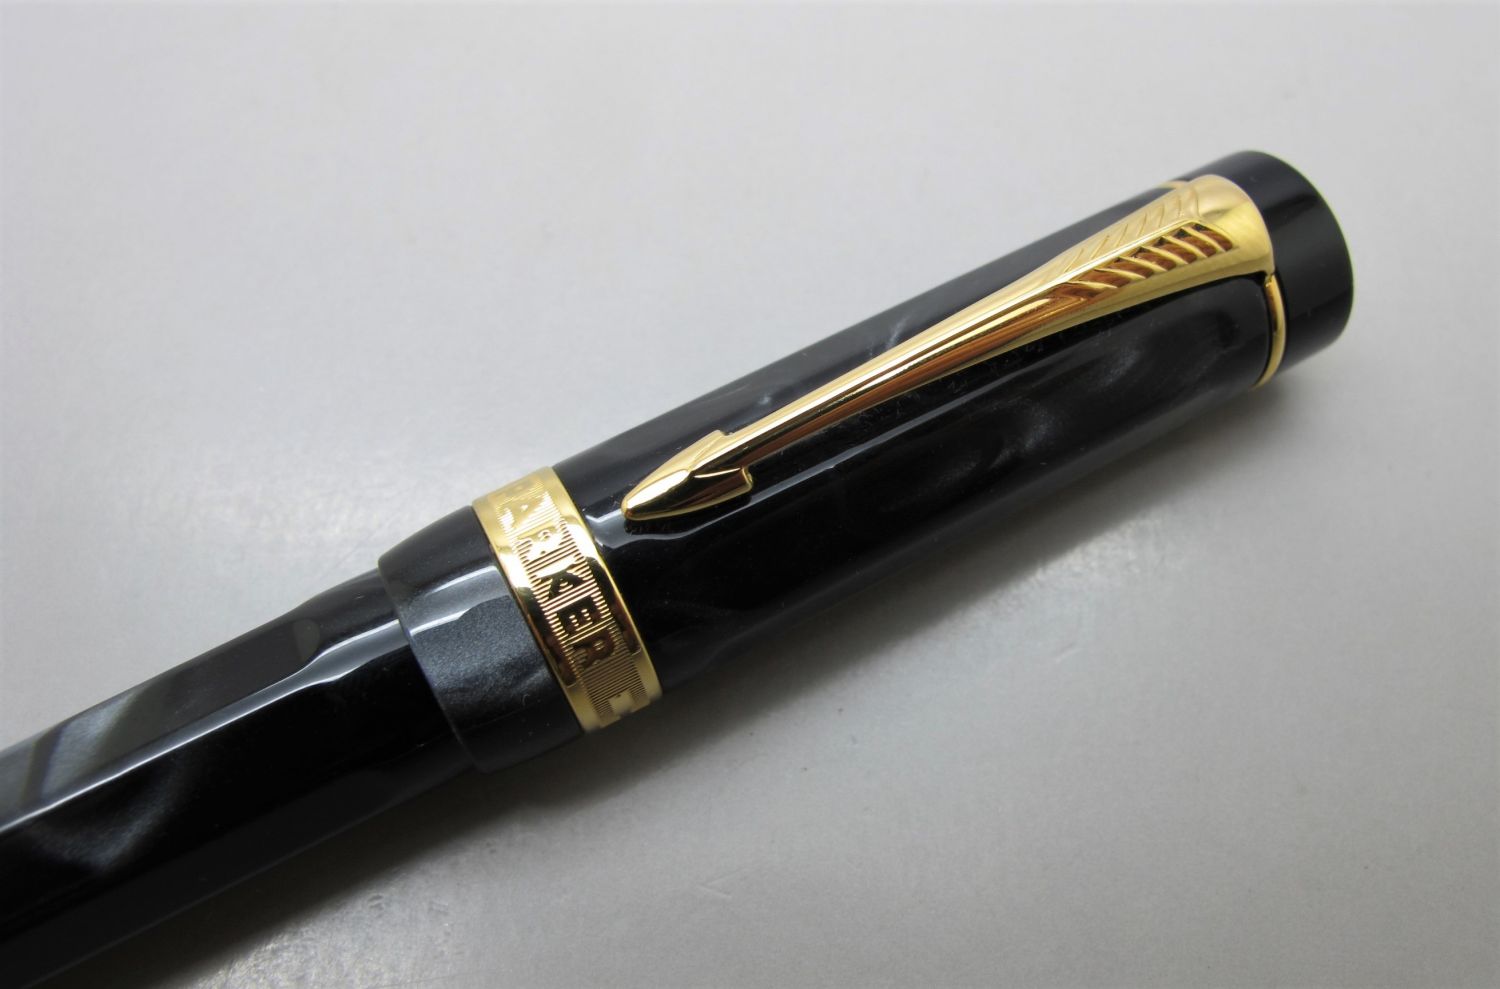 Parker Duofold Lucky 8 Limited Edition